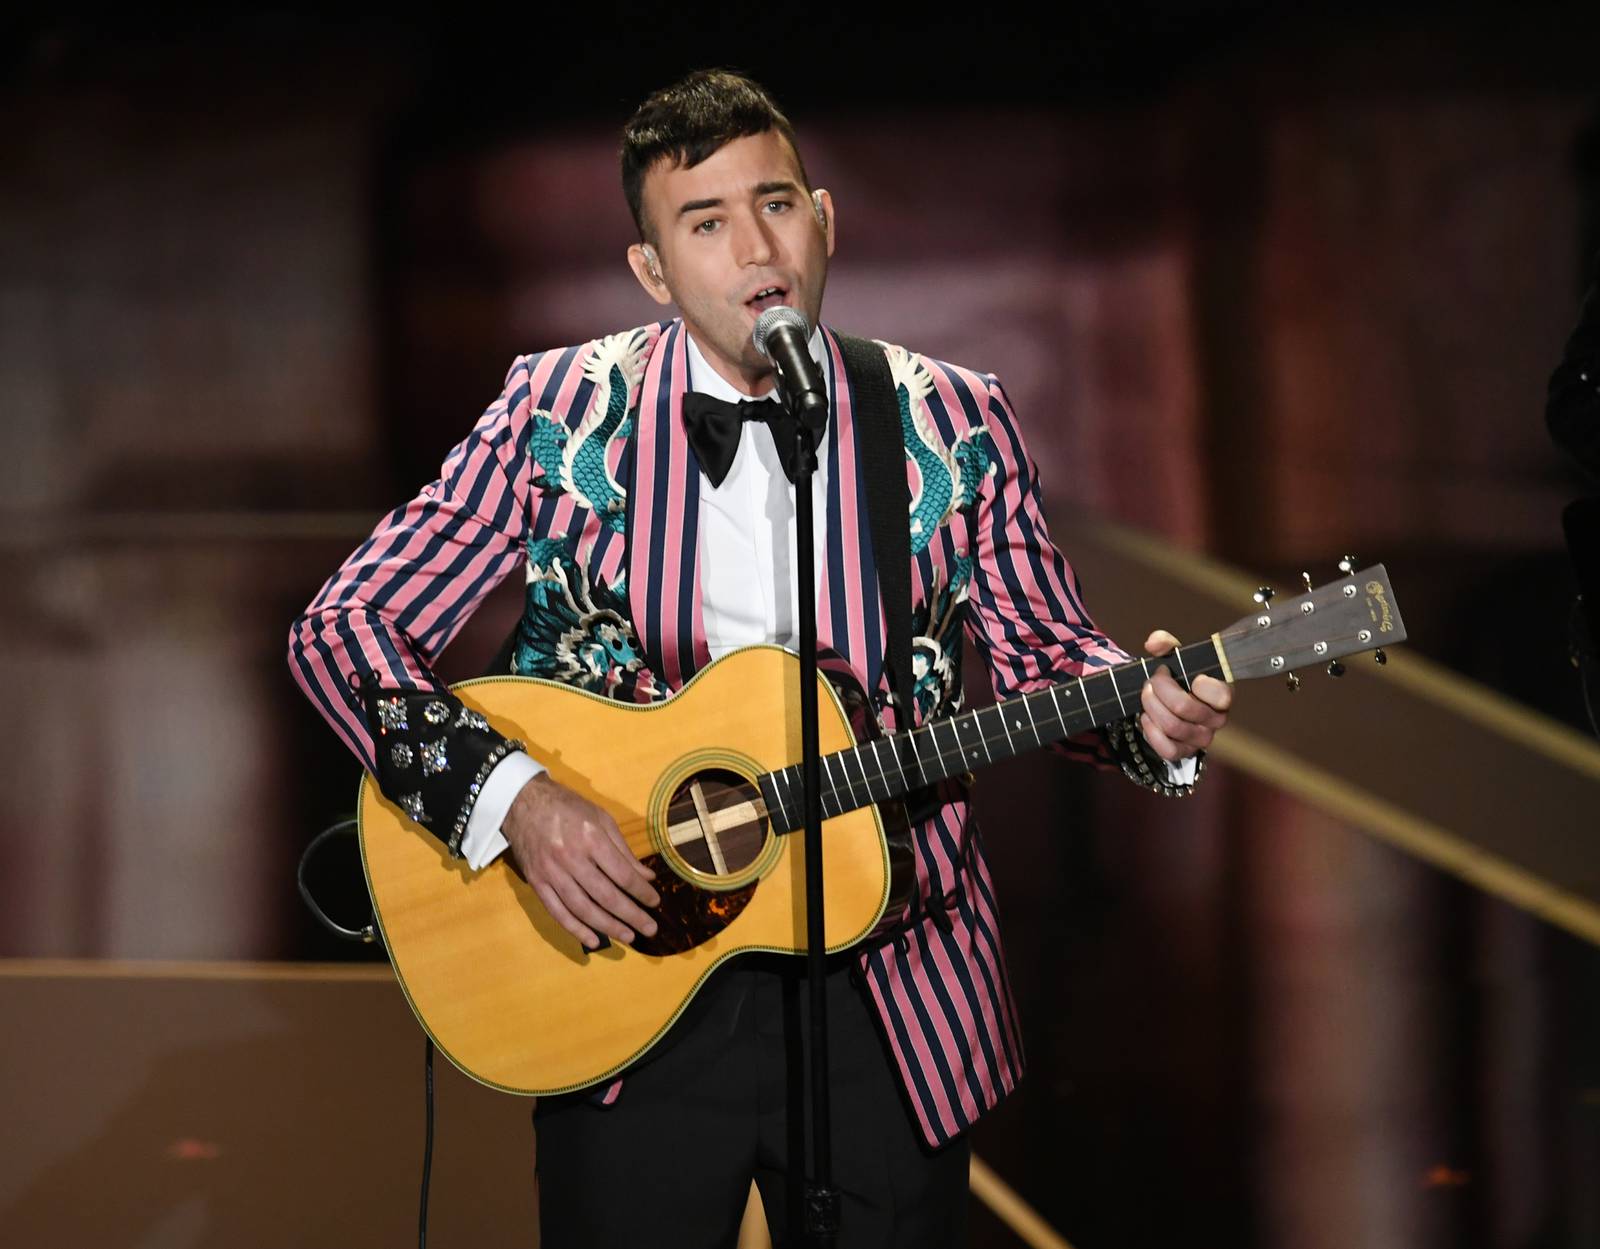 HOLLYWOOD, CA - MARCH 04:  Recording artist Sufjan Stevens performs onstage during the 90th Annual Academy Awards at the Dolby Theatre at Hollywood & Highland Center on March 4, 2018 in Hollywood, California.  (Photo by Kevin Winter/Getty Images)